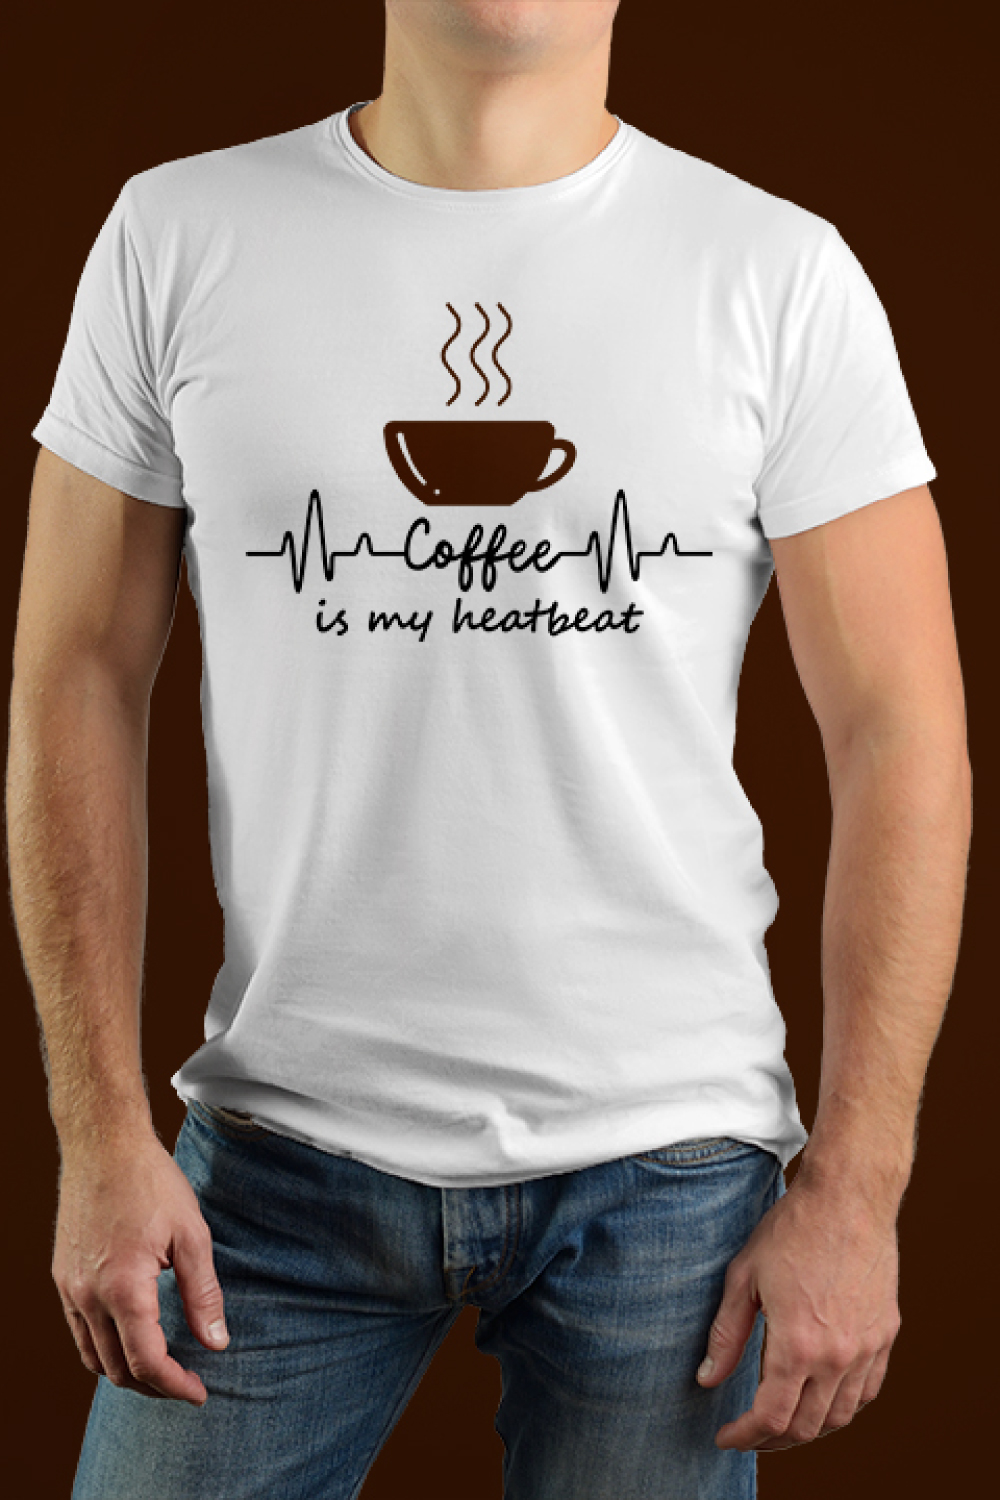 Coffee is my heartbeat t shirt design pinterest preview image.